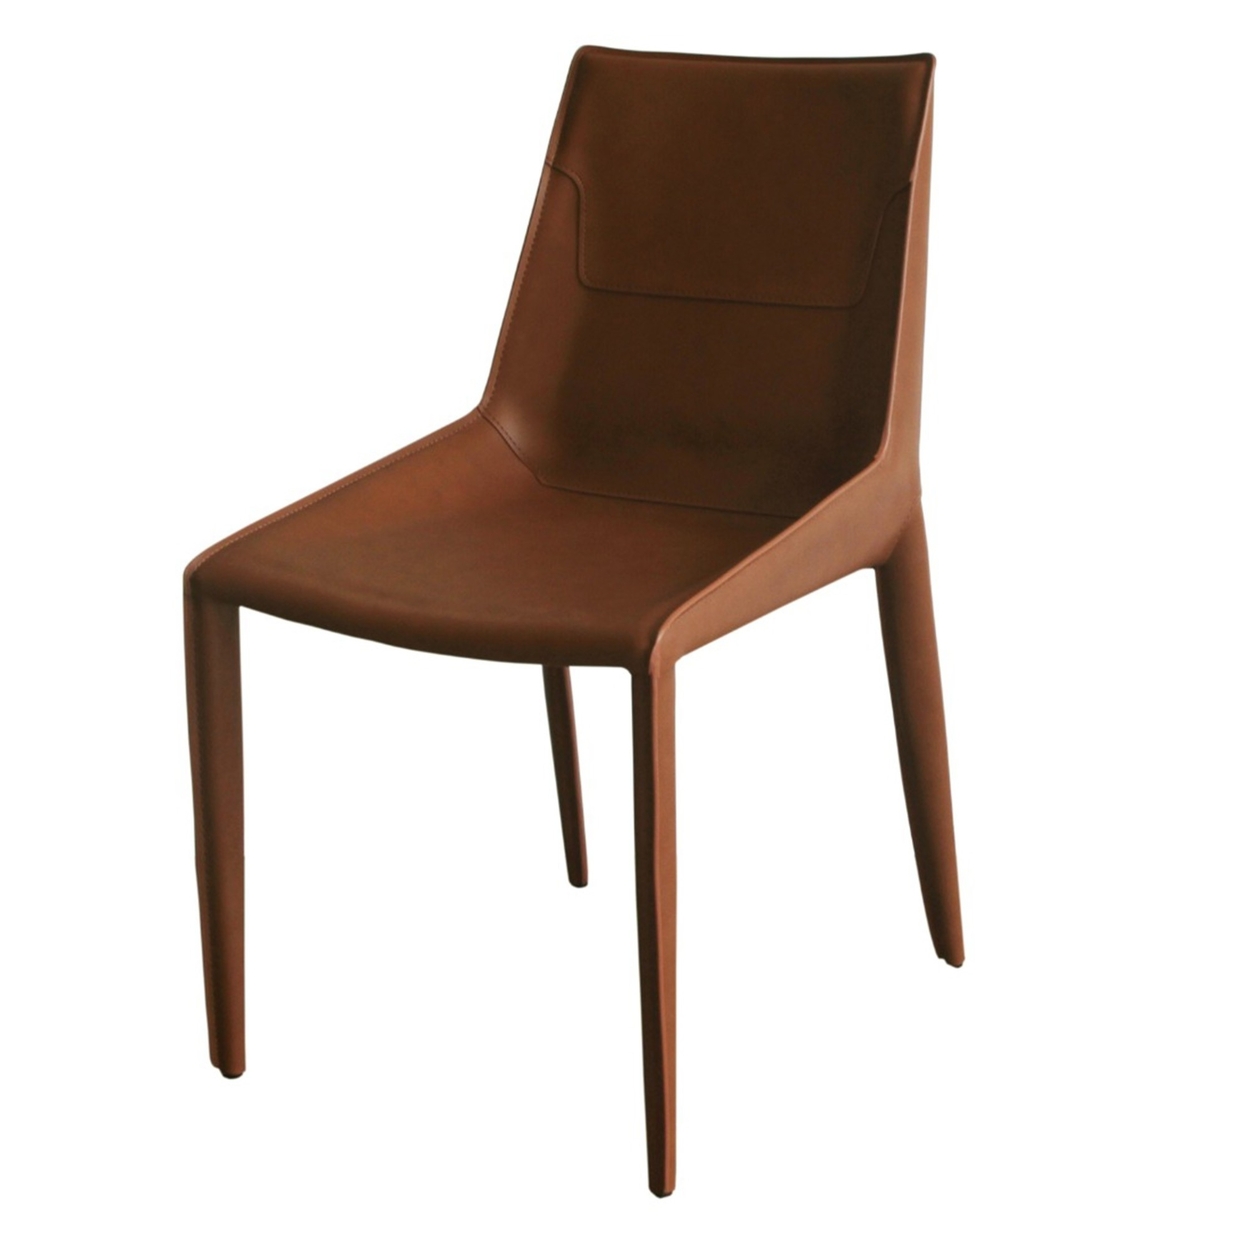 Cid Paz 19 Inch Dining Chair, Set Of 2, Brown Saddle Leather, Tapered Legs - Saltoro Sherpi